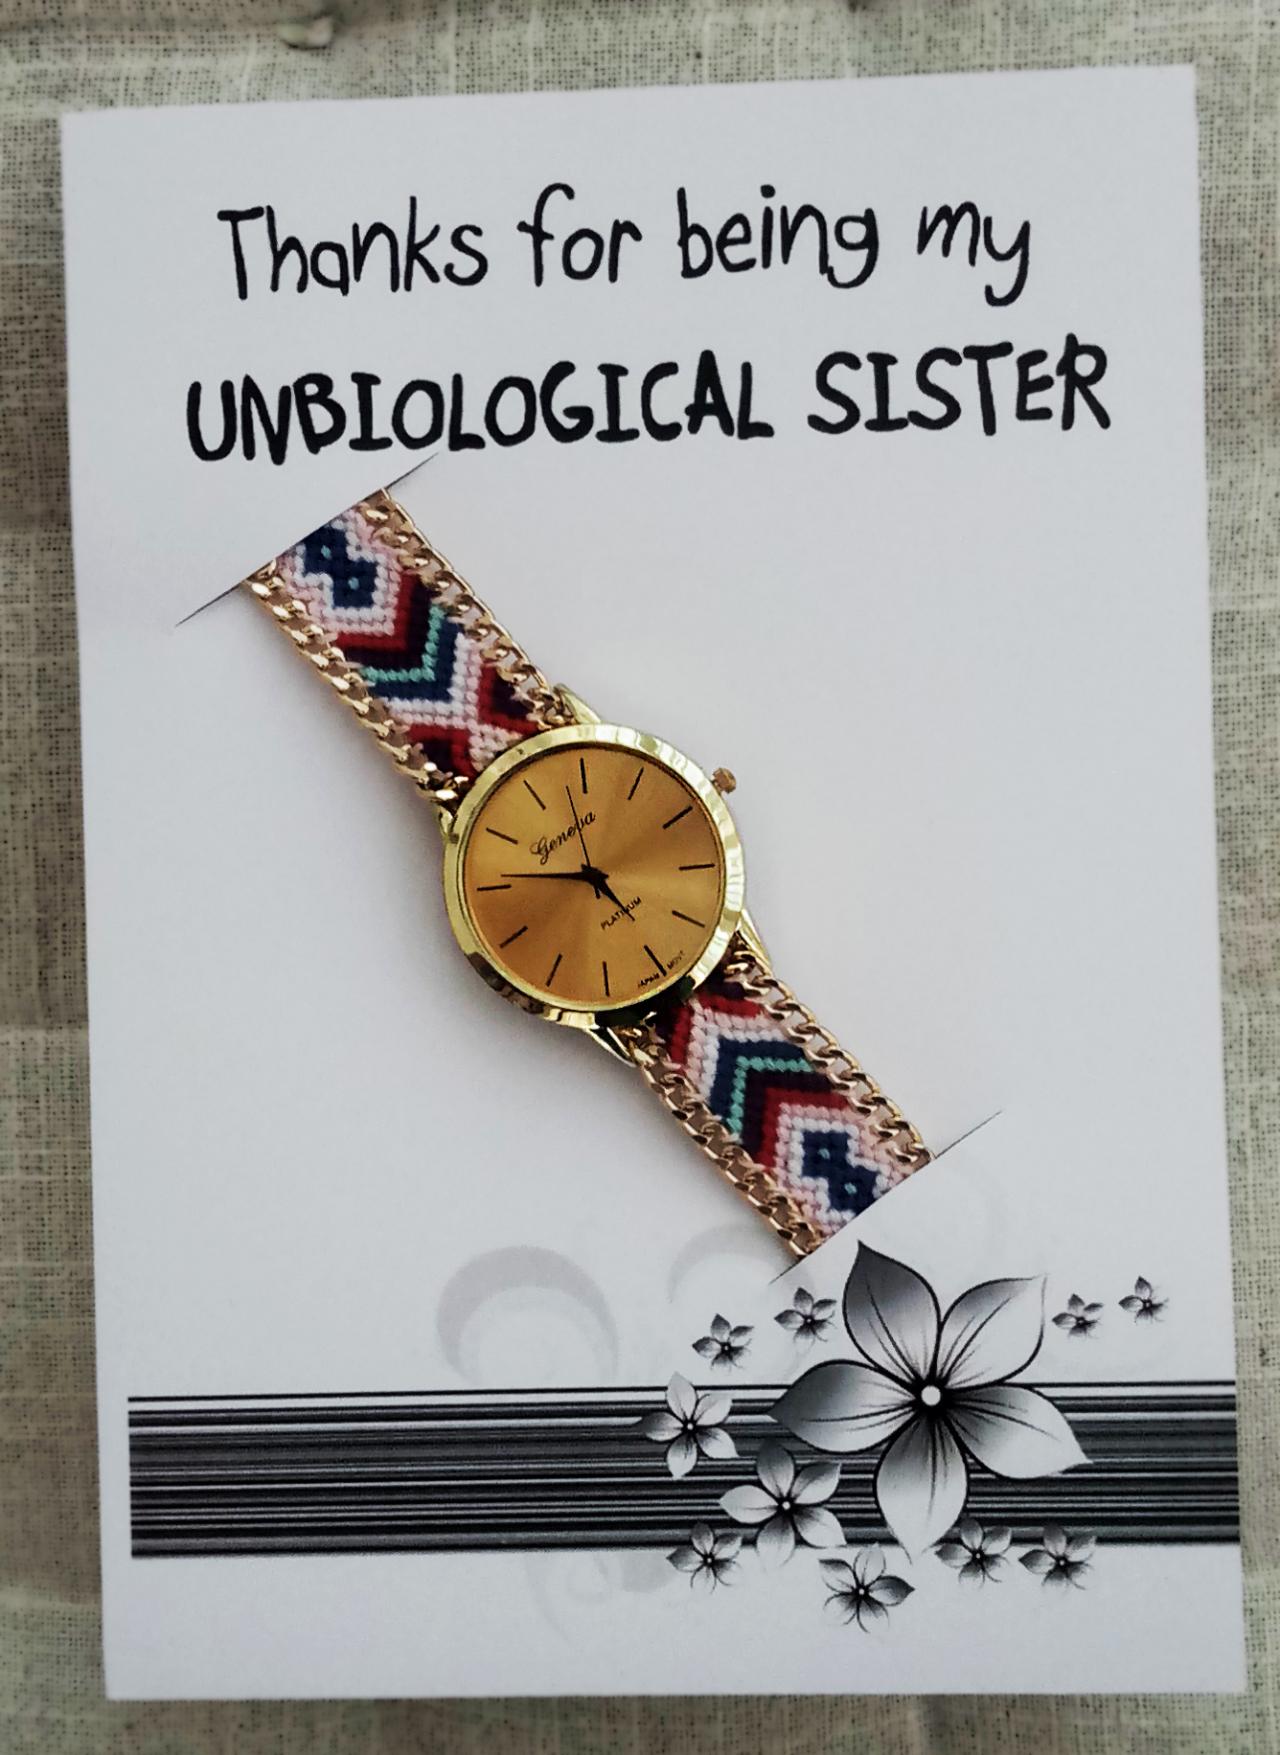 Colorful Band Friendship Wrist Unbiological Sister Gift Card Watch